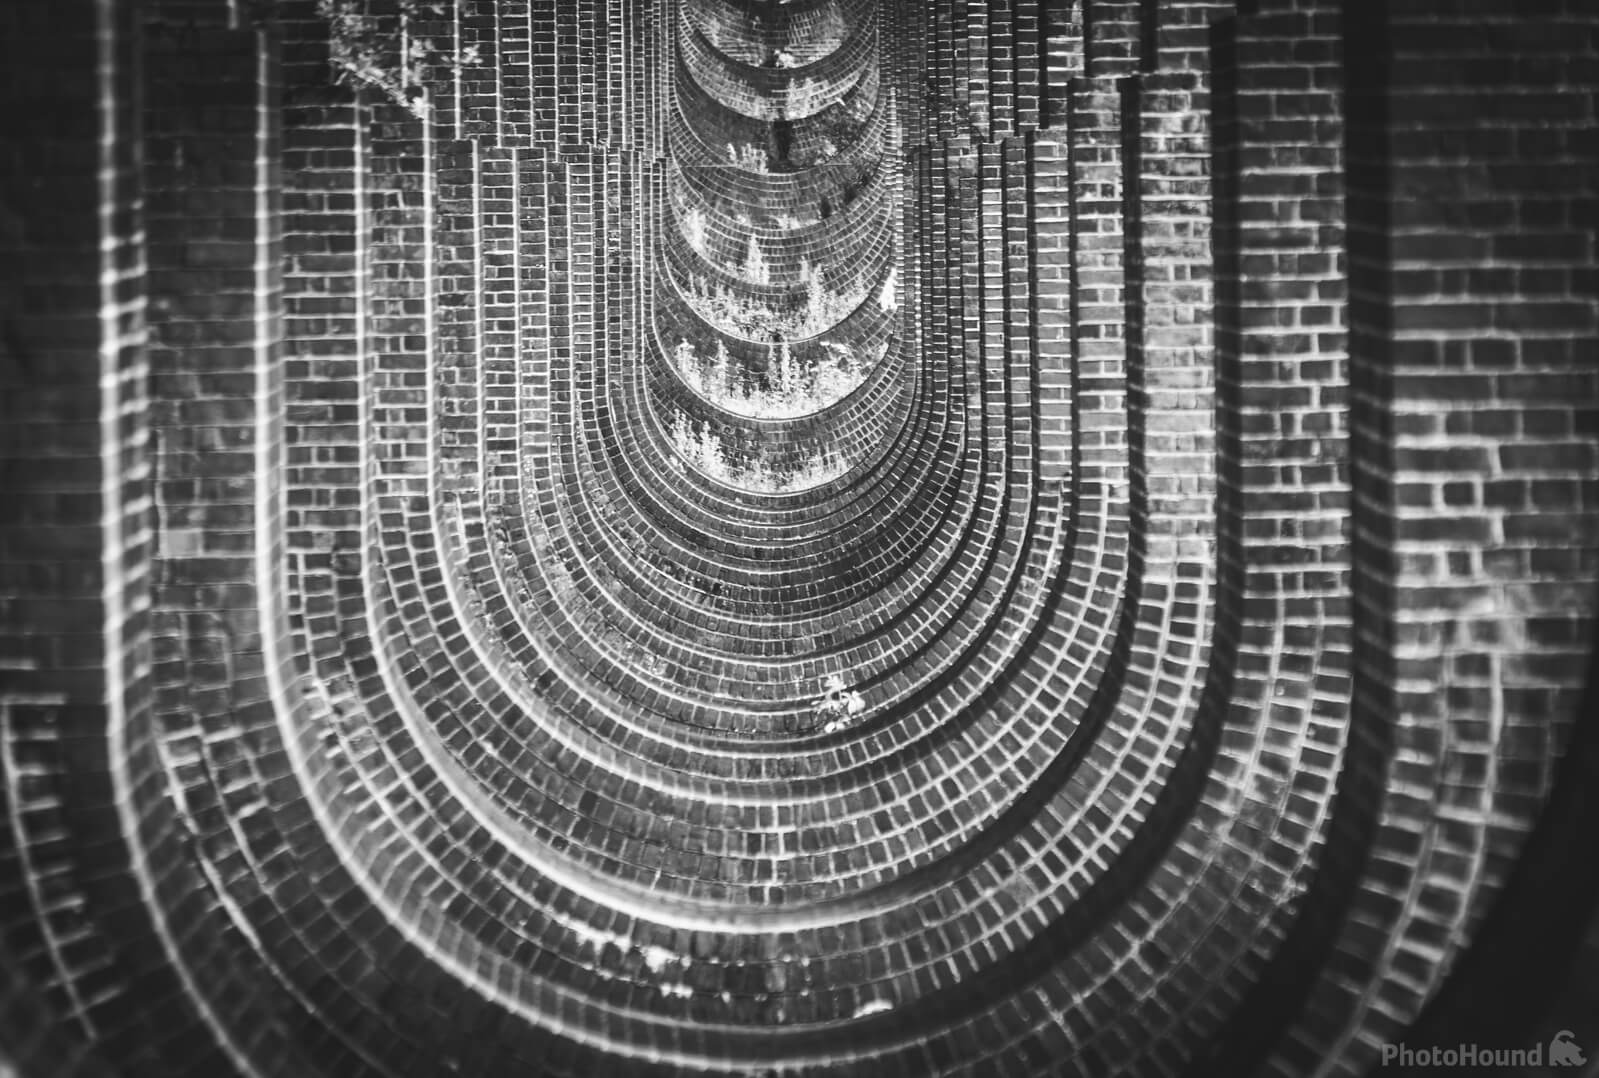 Image of Ouse Valley Viaduct by Richard Joiner